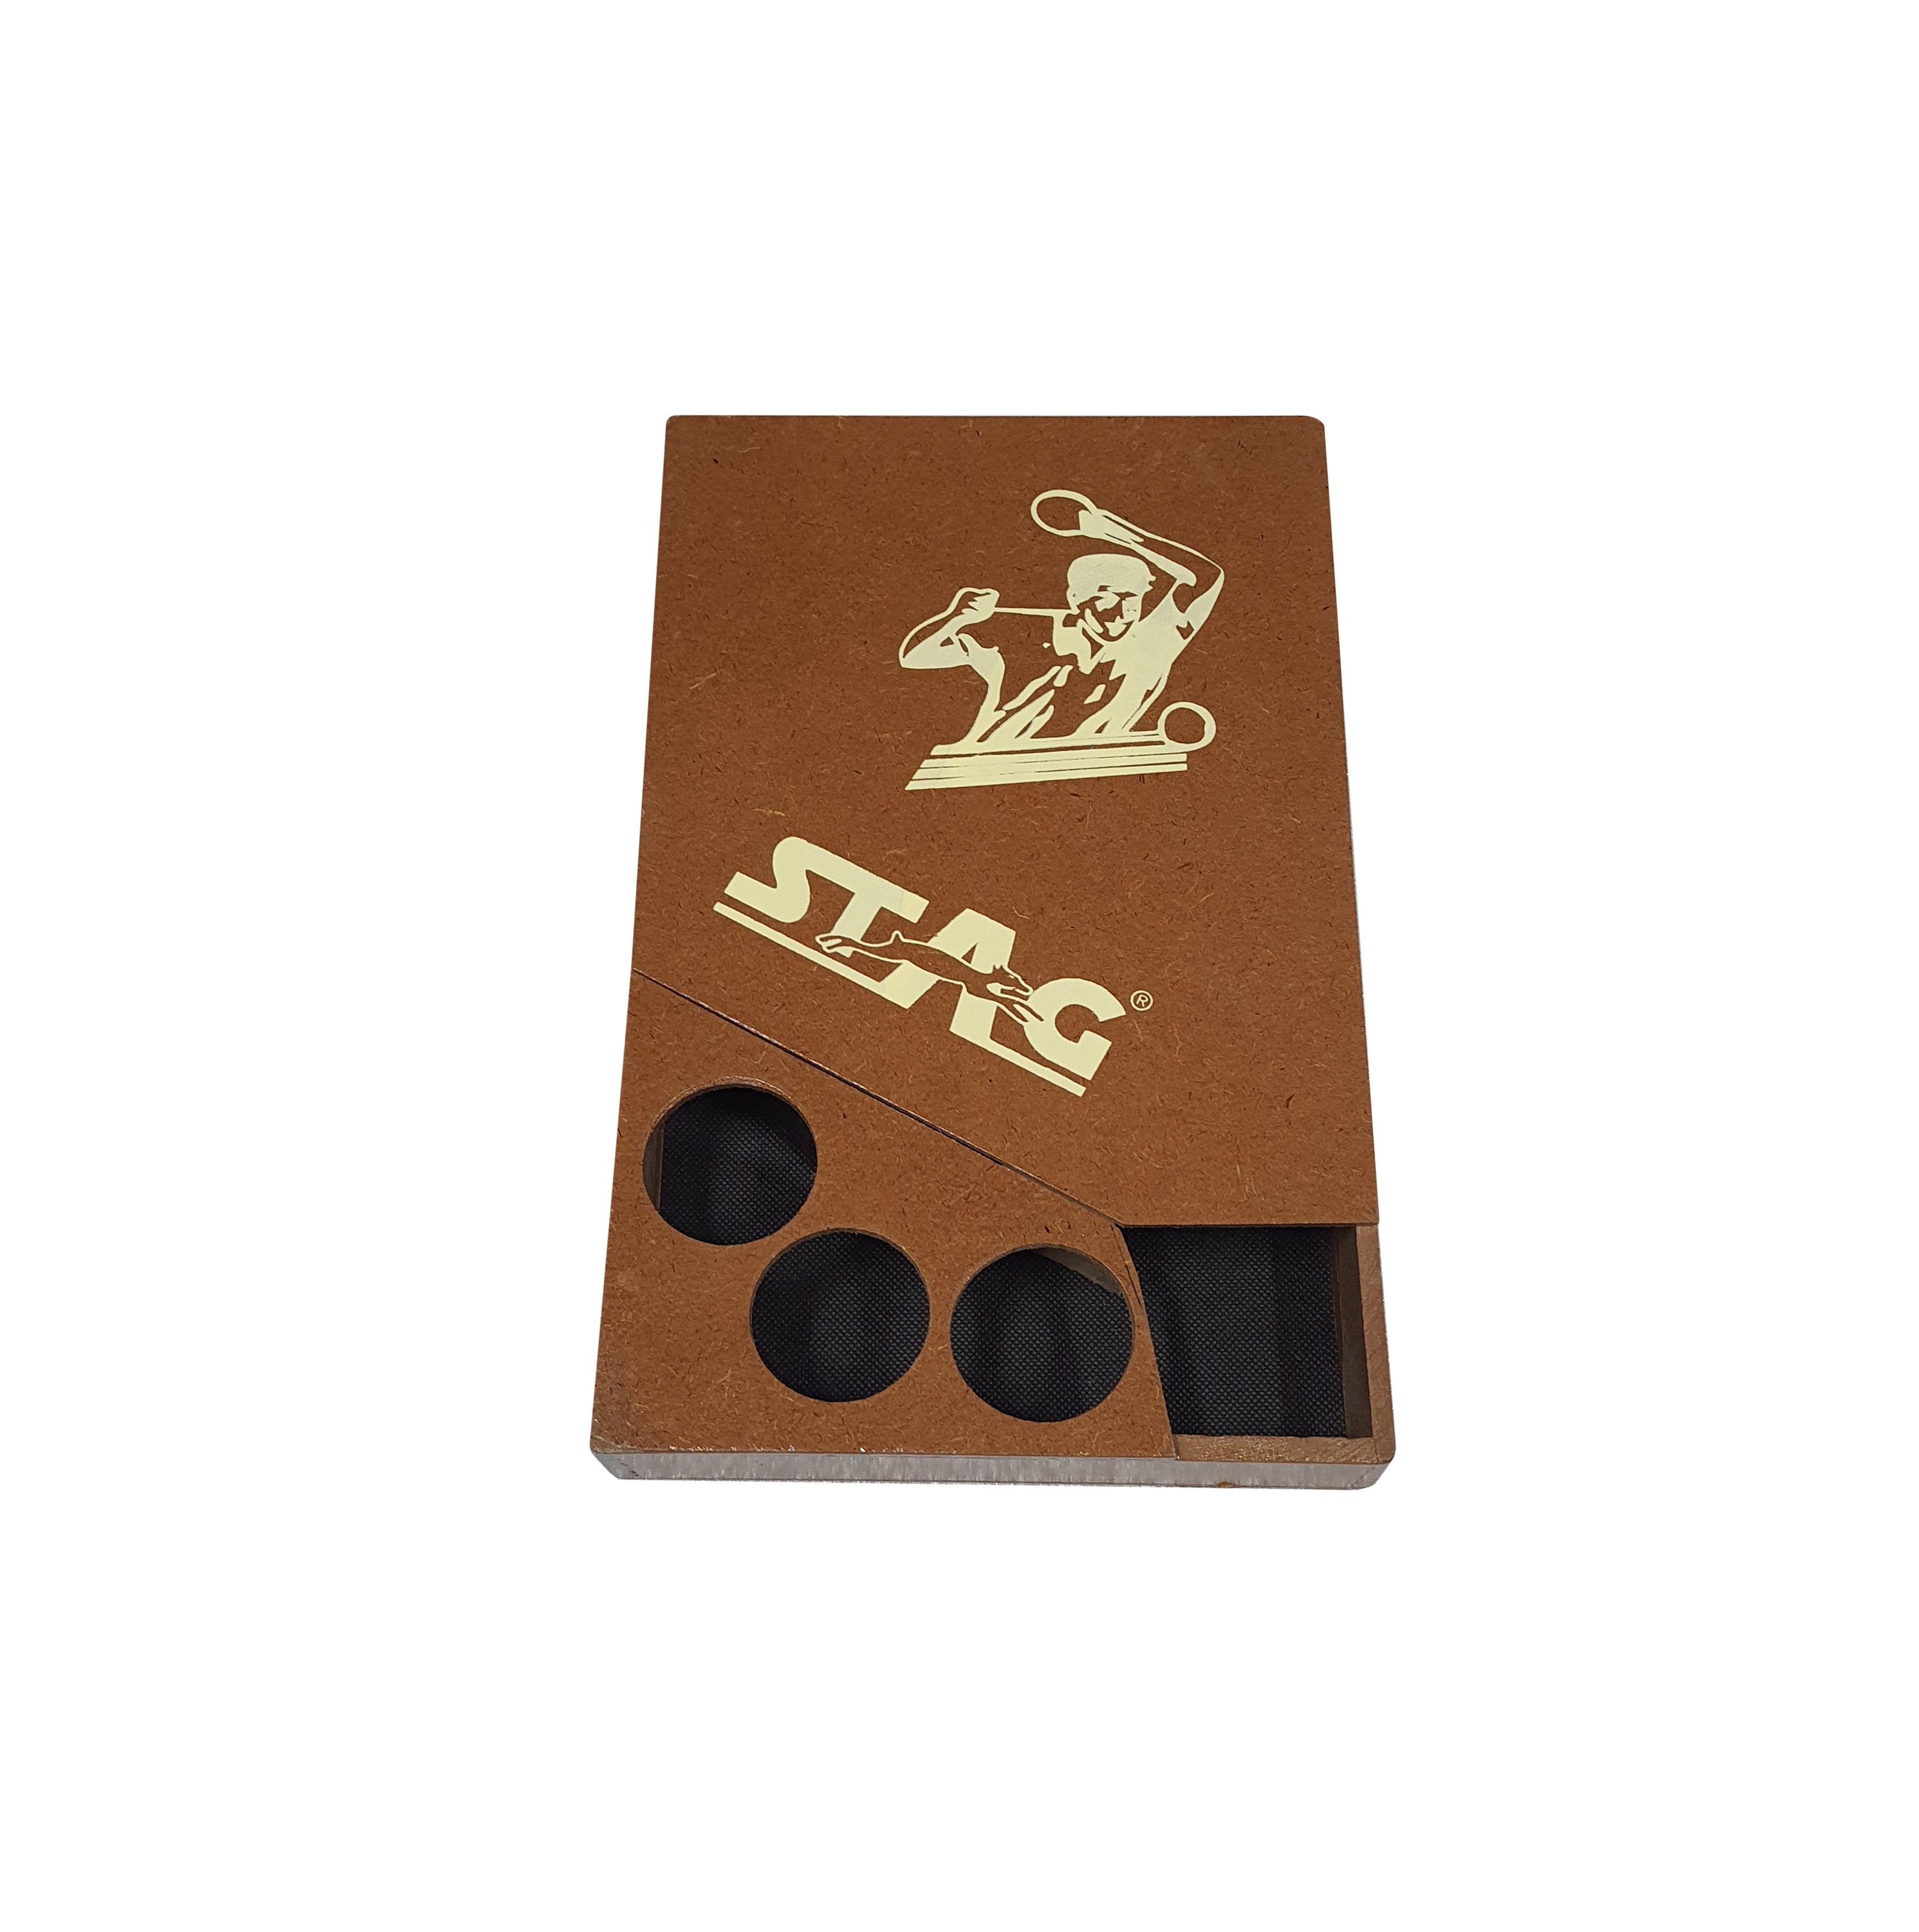 STAG TABLE TENNIS CASE WITH WOODEN BOX